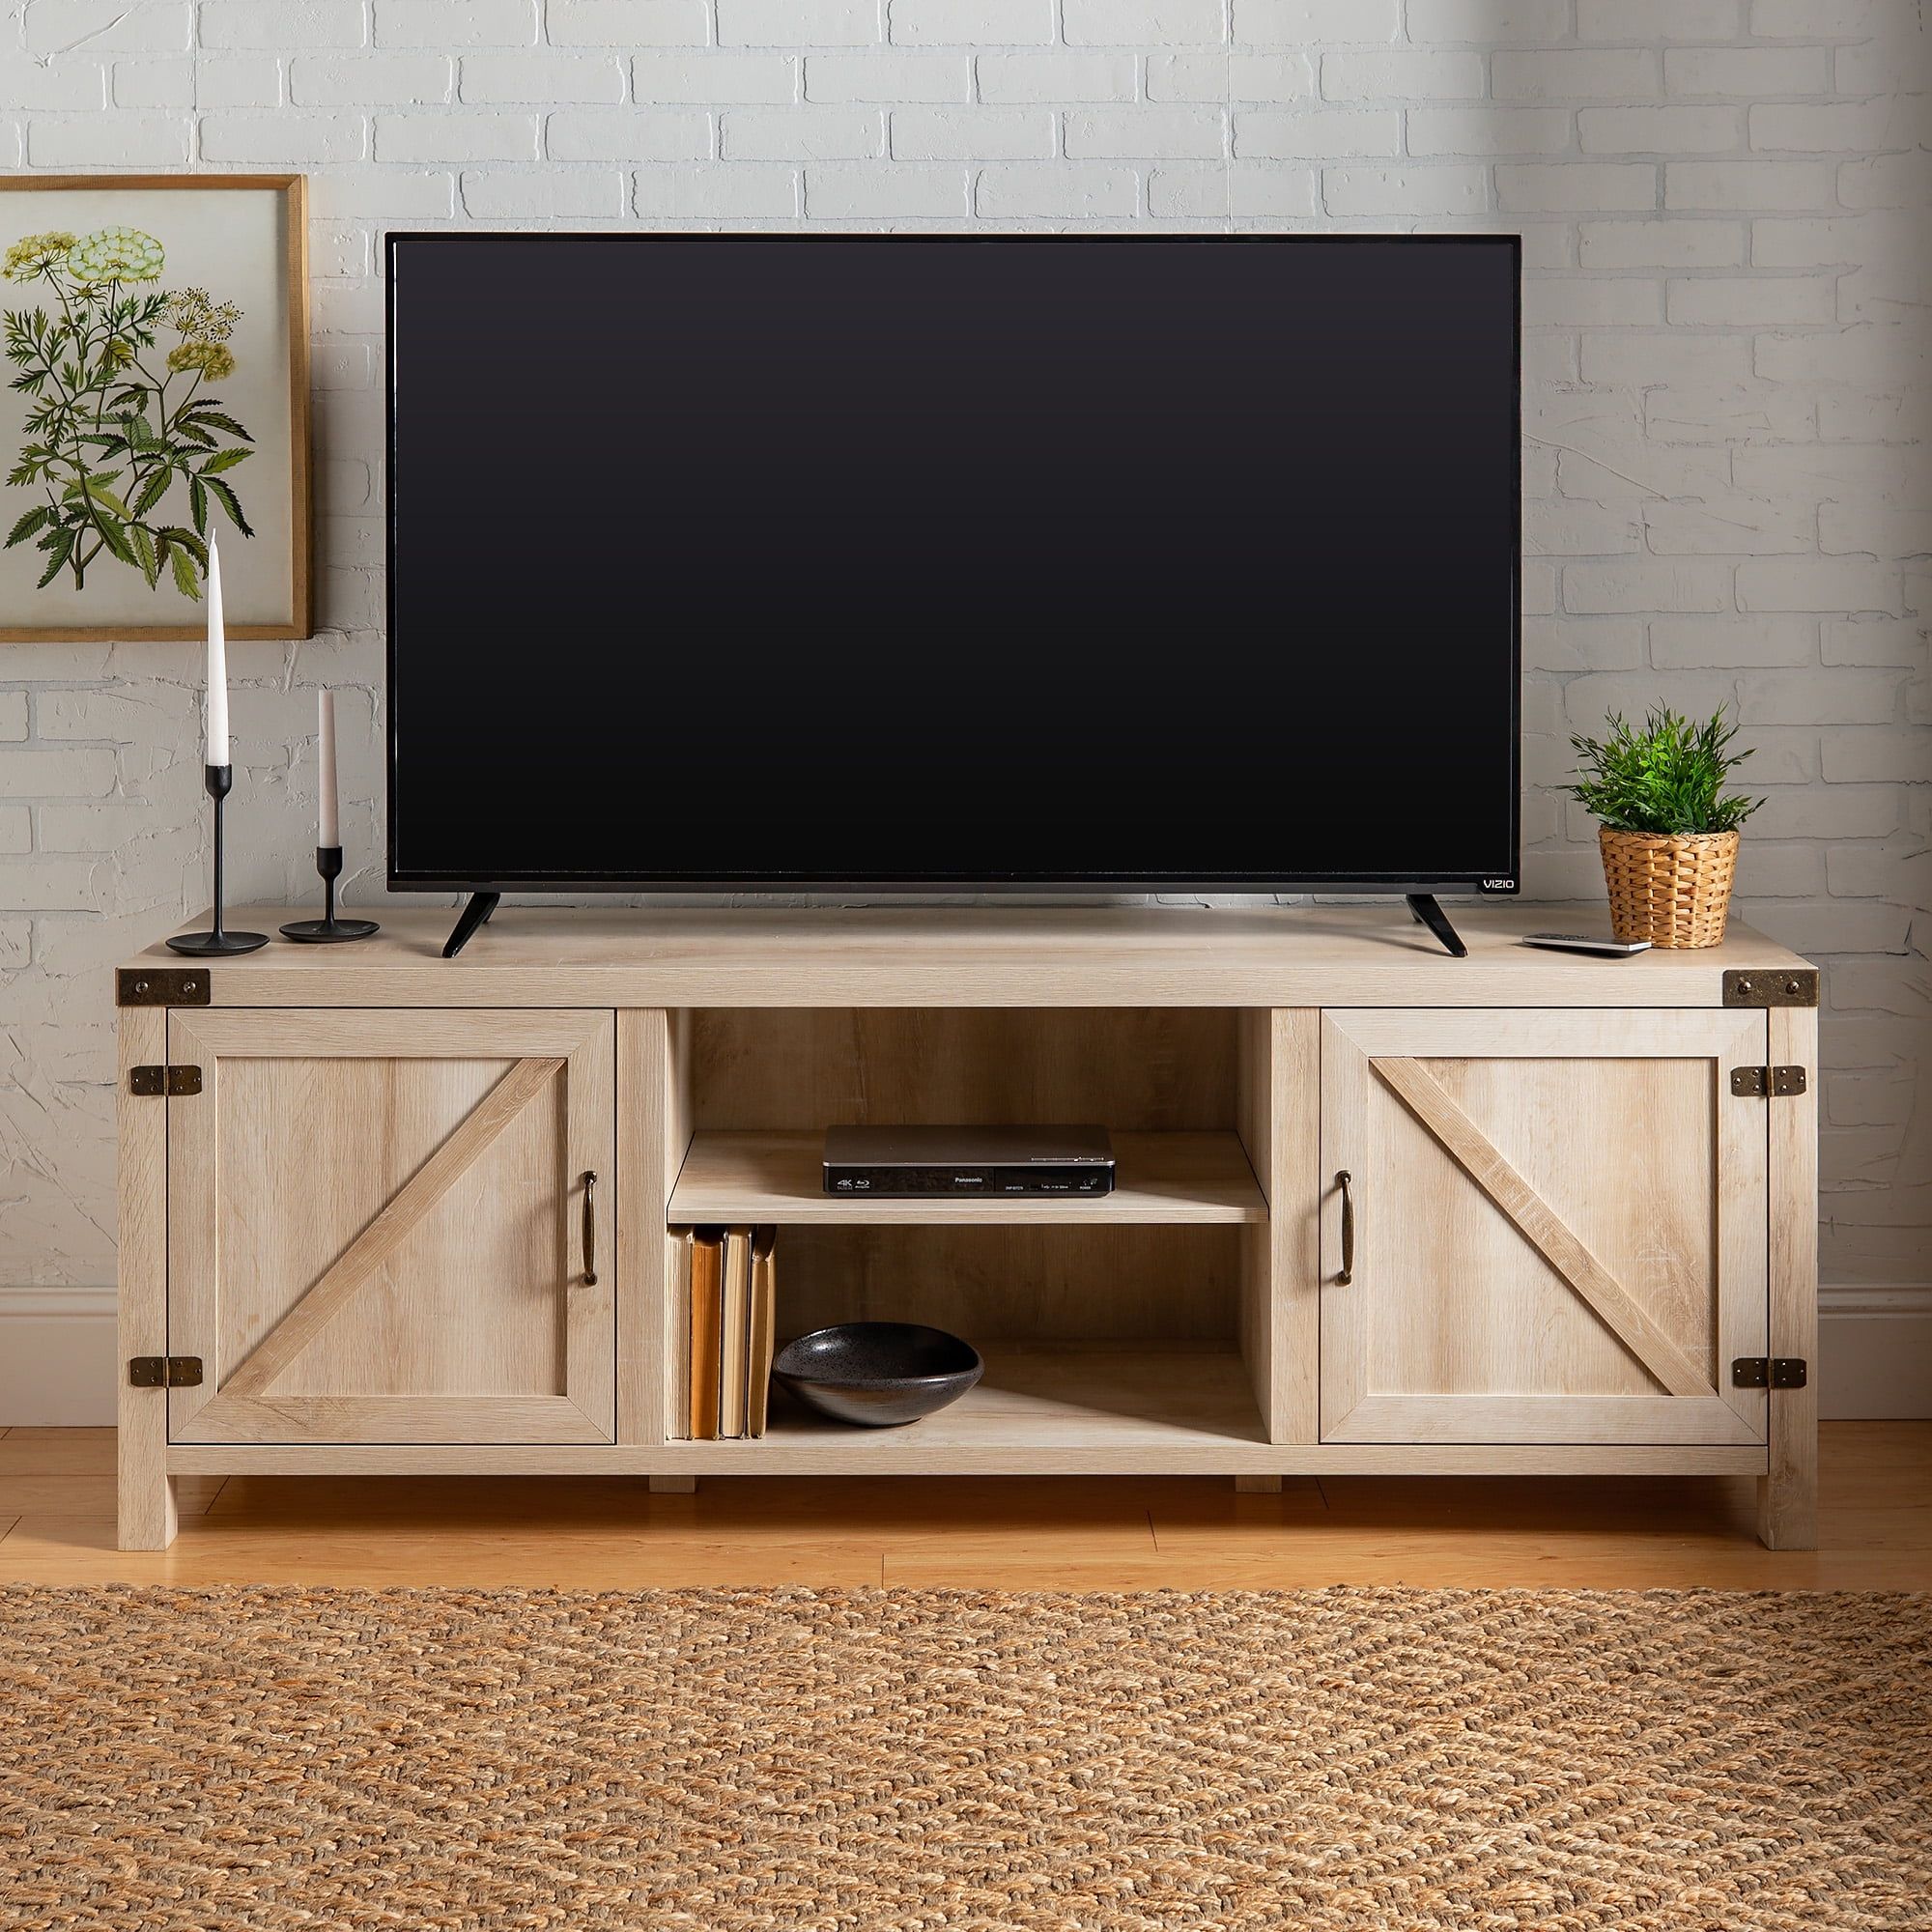 Woven Paths Farmhouse Barn Door Tv Stand For Tvs Up To 80", White Oak For Farmhouse Tv Stands For 70 Inch Tv (View 13 of 20)